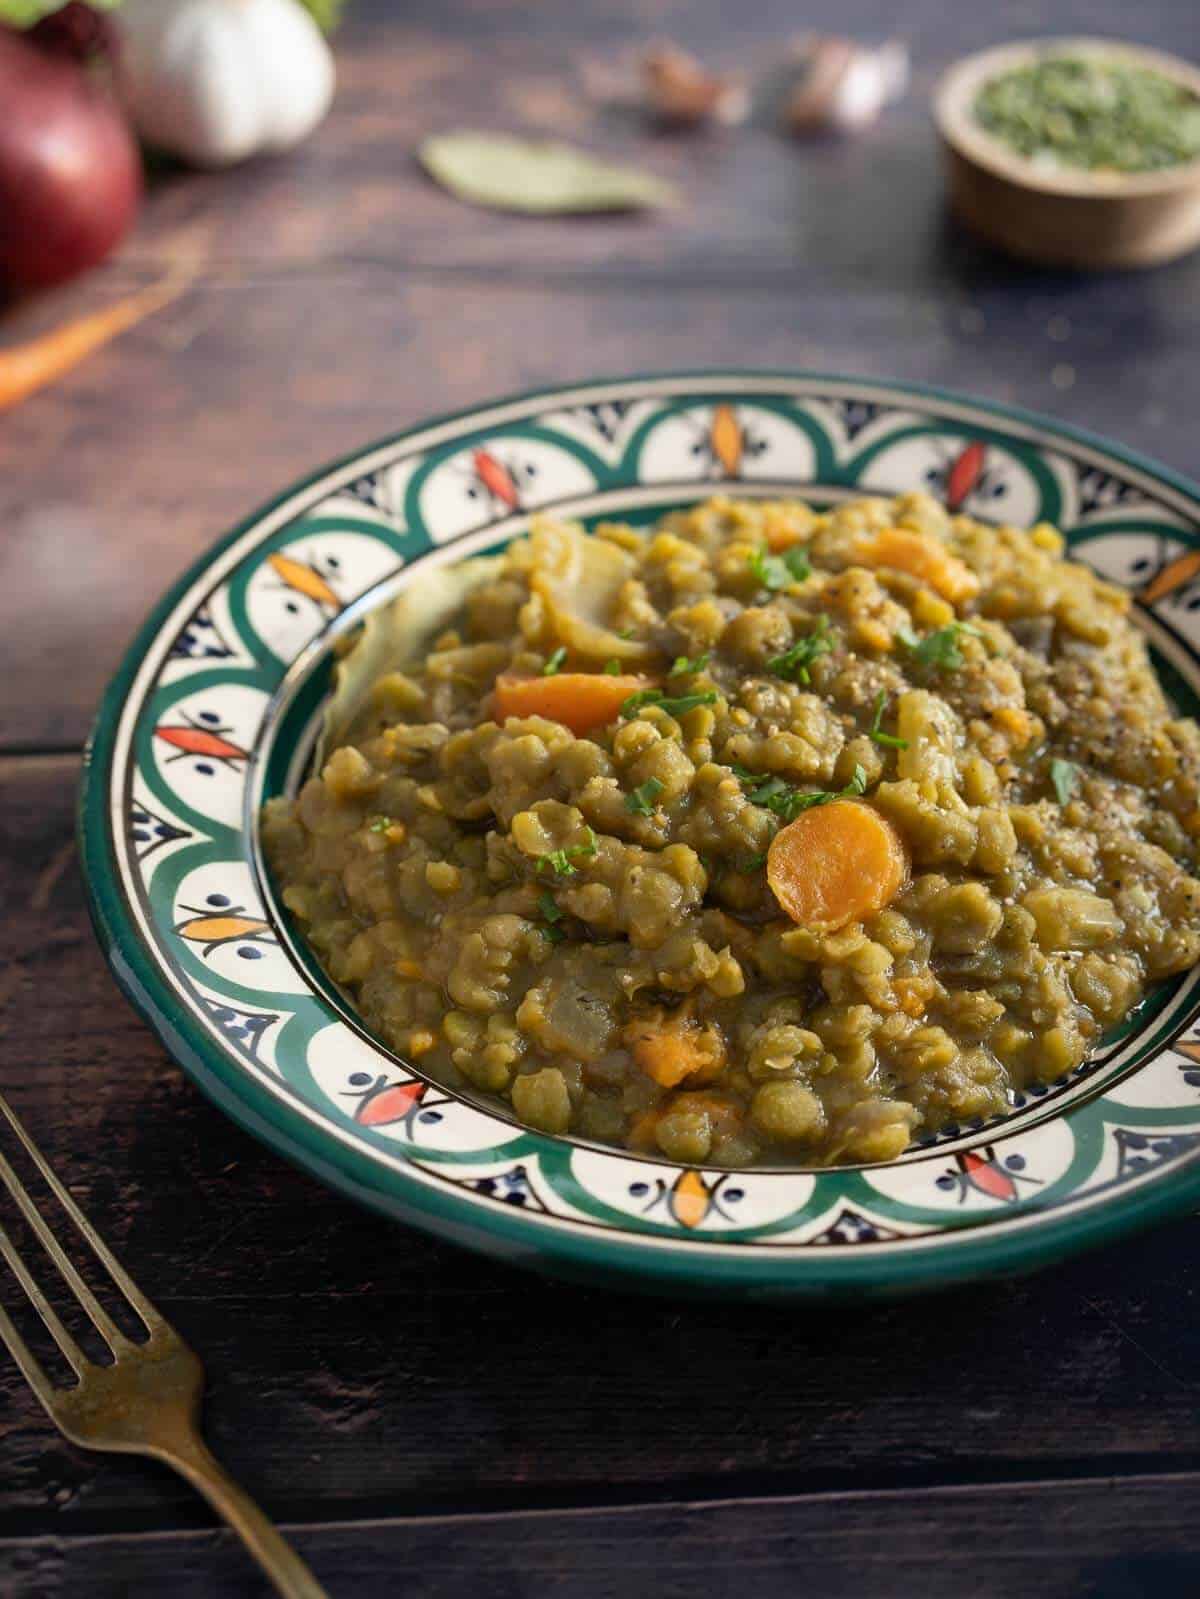 pea pottage served in a colorful plate.